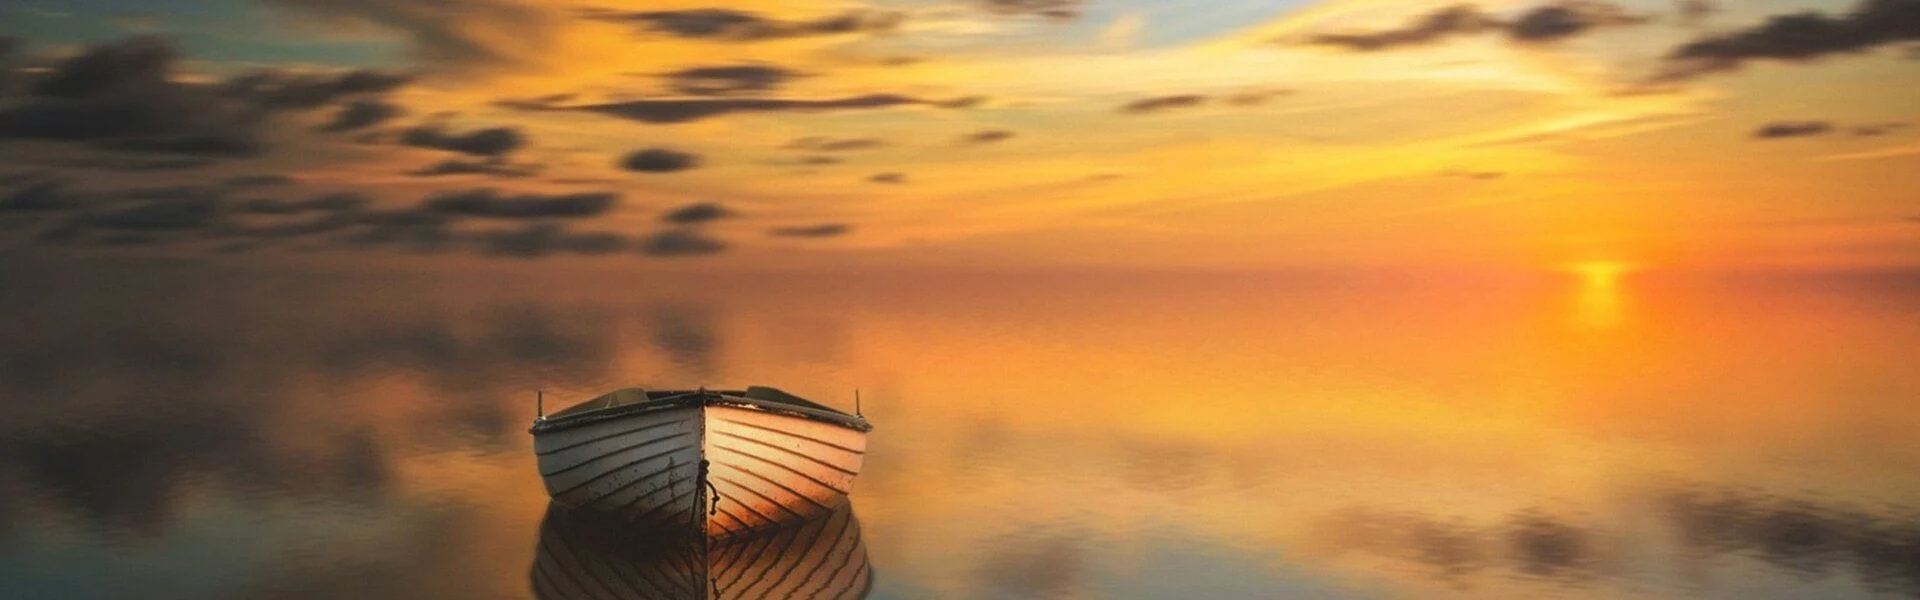 boat on the water at sunset